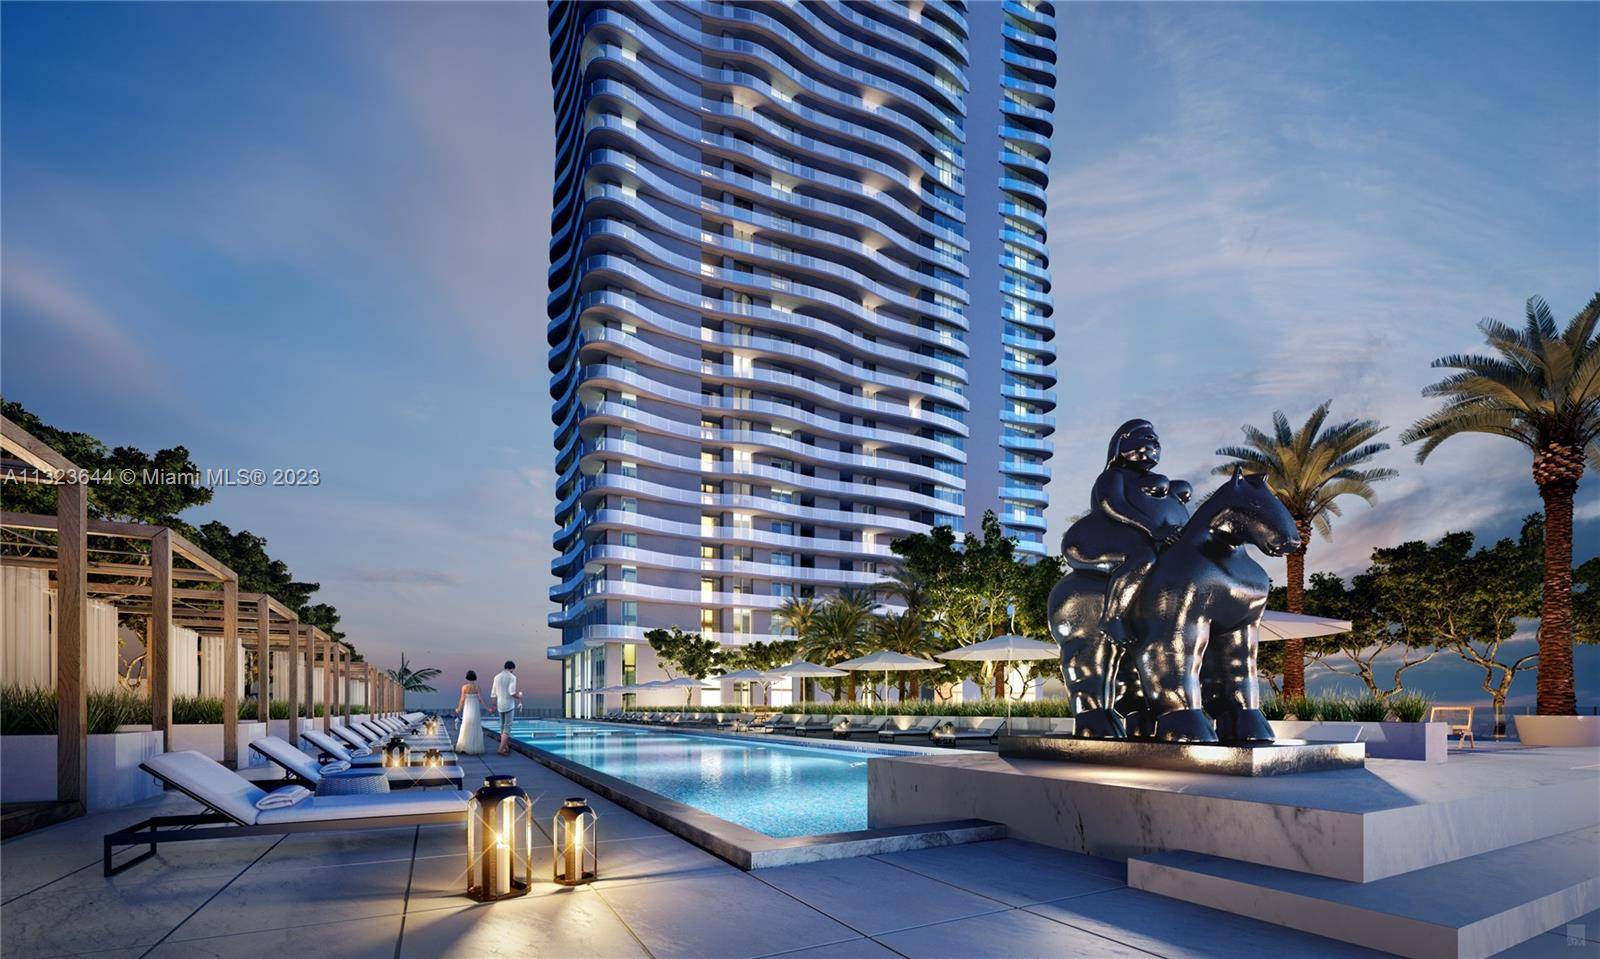 Located in the heart of the arts and cultural district, one of Miami's most prestigious neighborhoods, a thriving, international hub of arts, dining, finance, culture and entertainment.